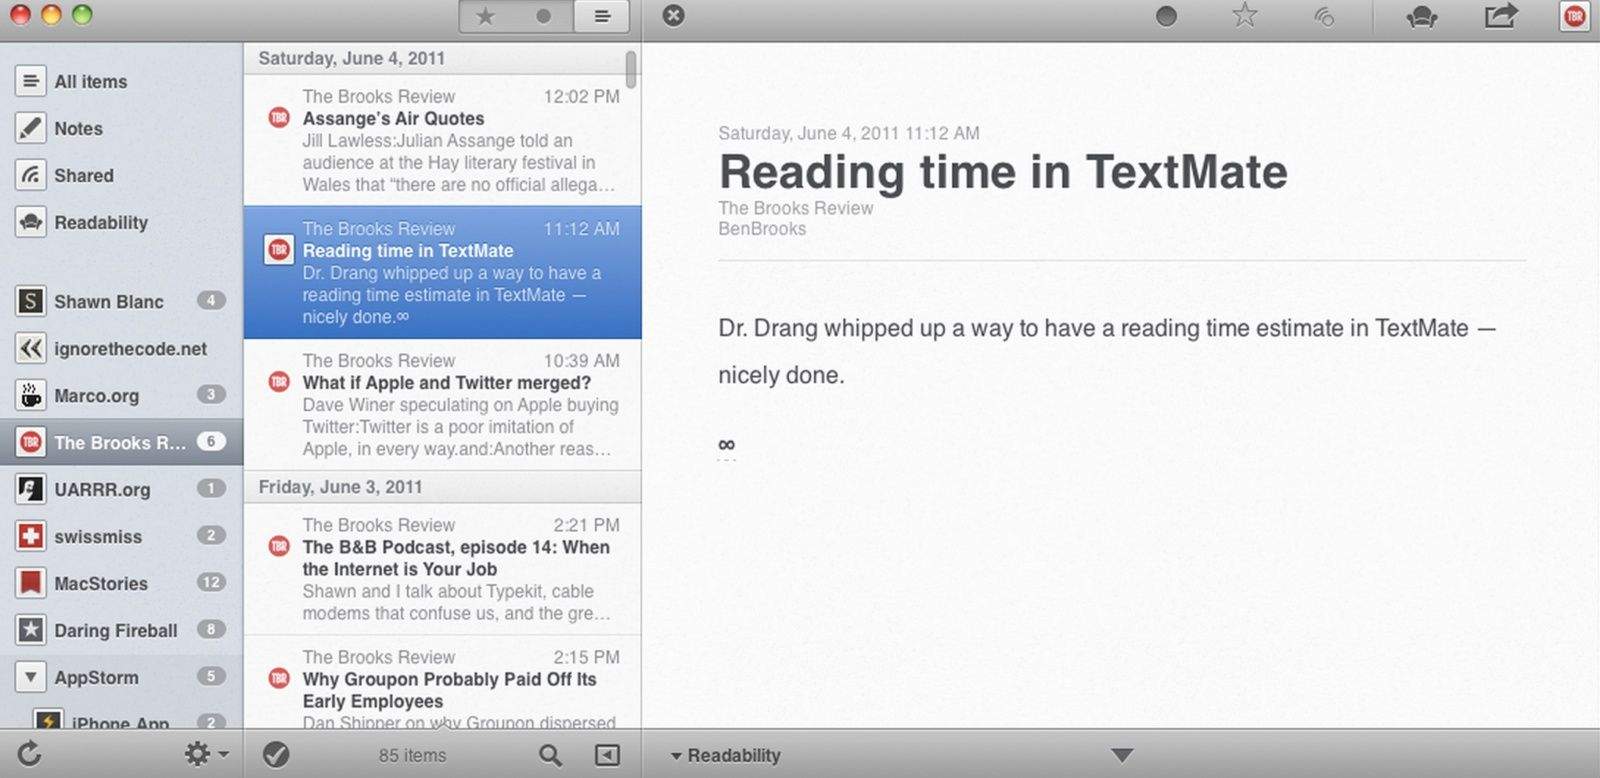 The best RSS reader yet?